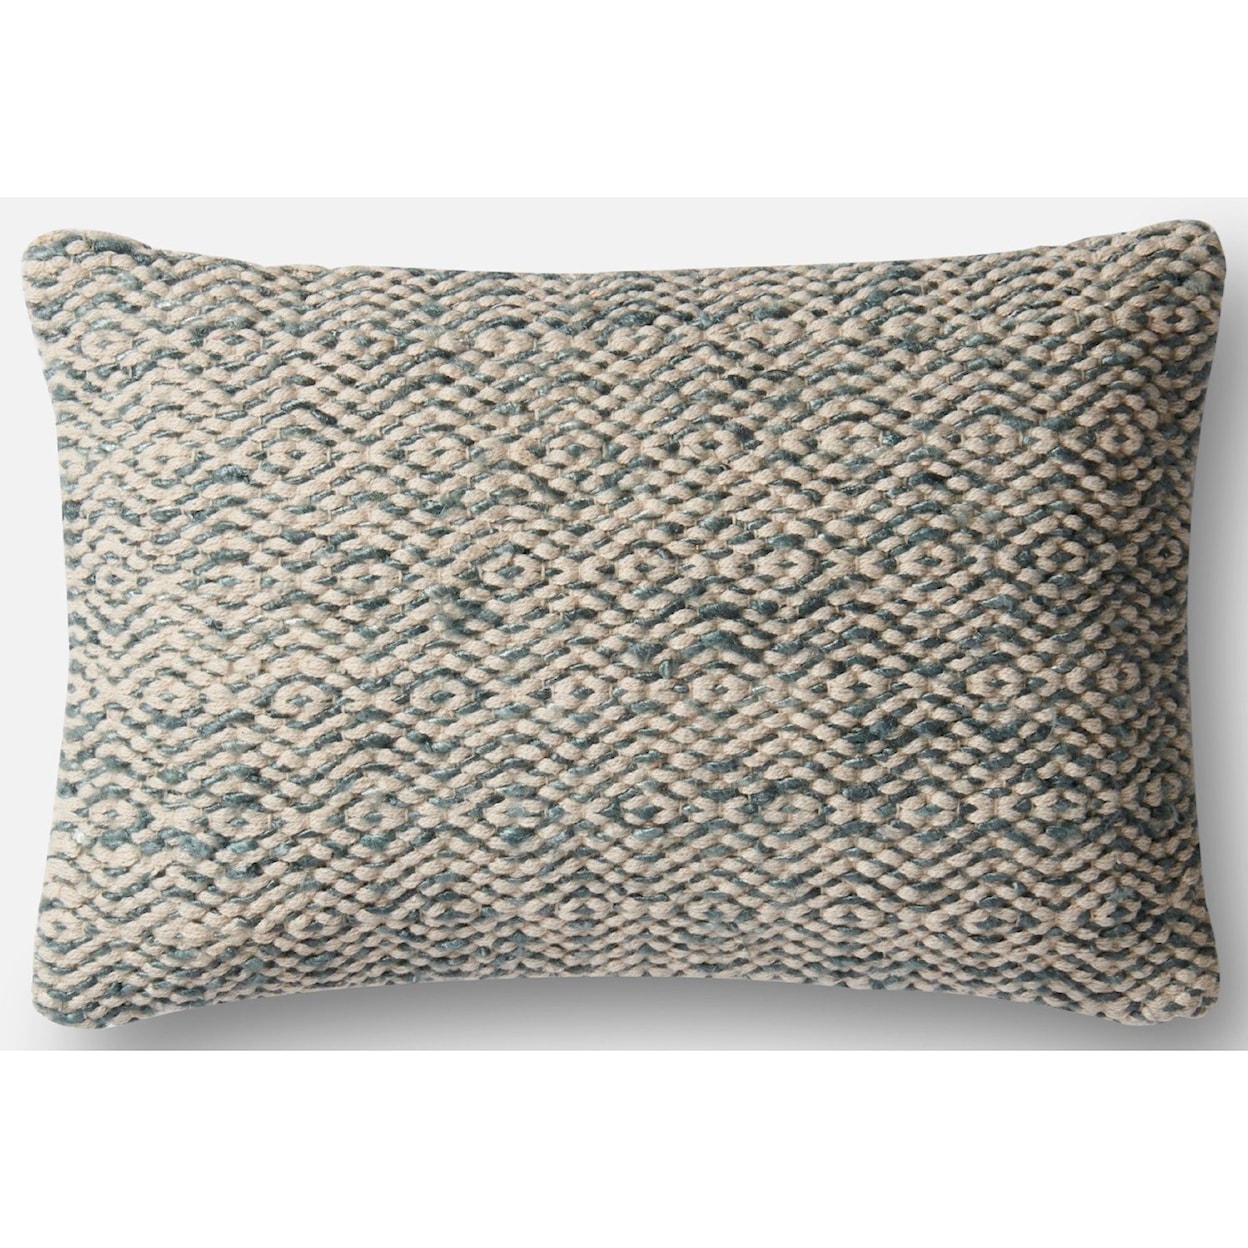 Magnolia Home by Joanna Gaines for Loloi Accent Pillows 13" X 21" Cover w/Down Pillow